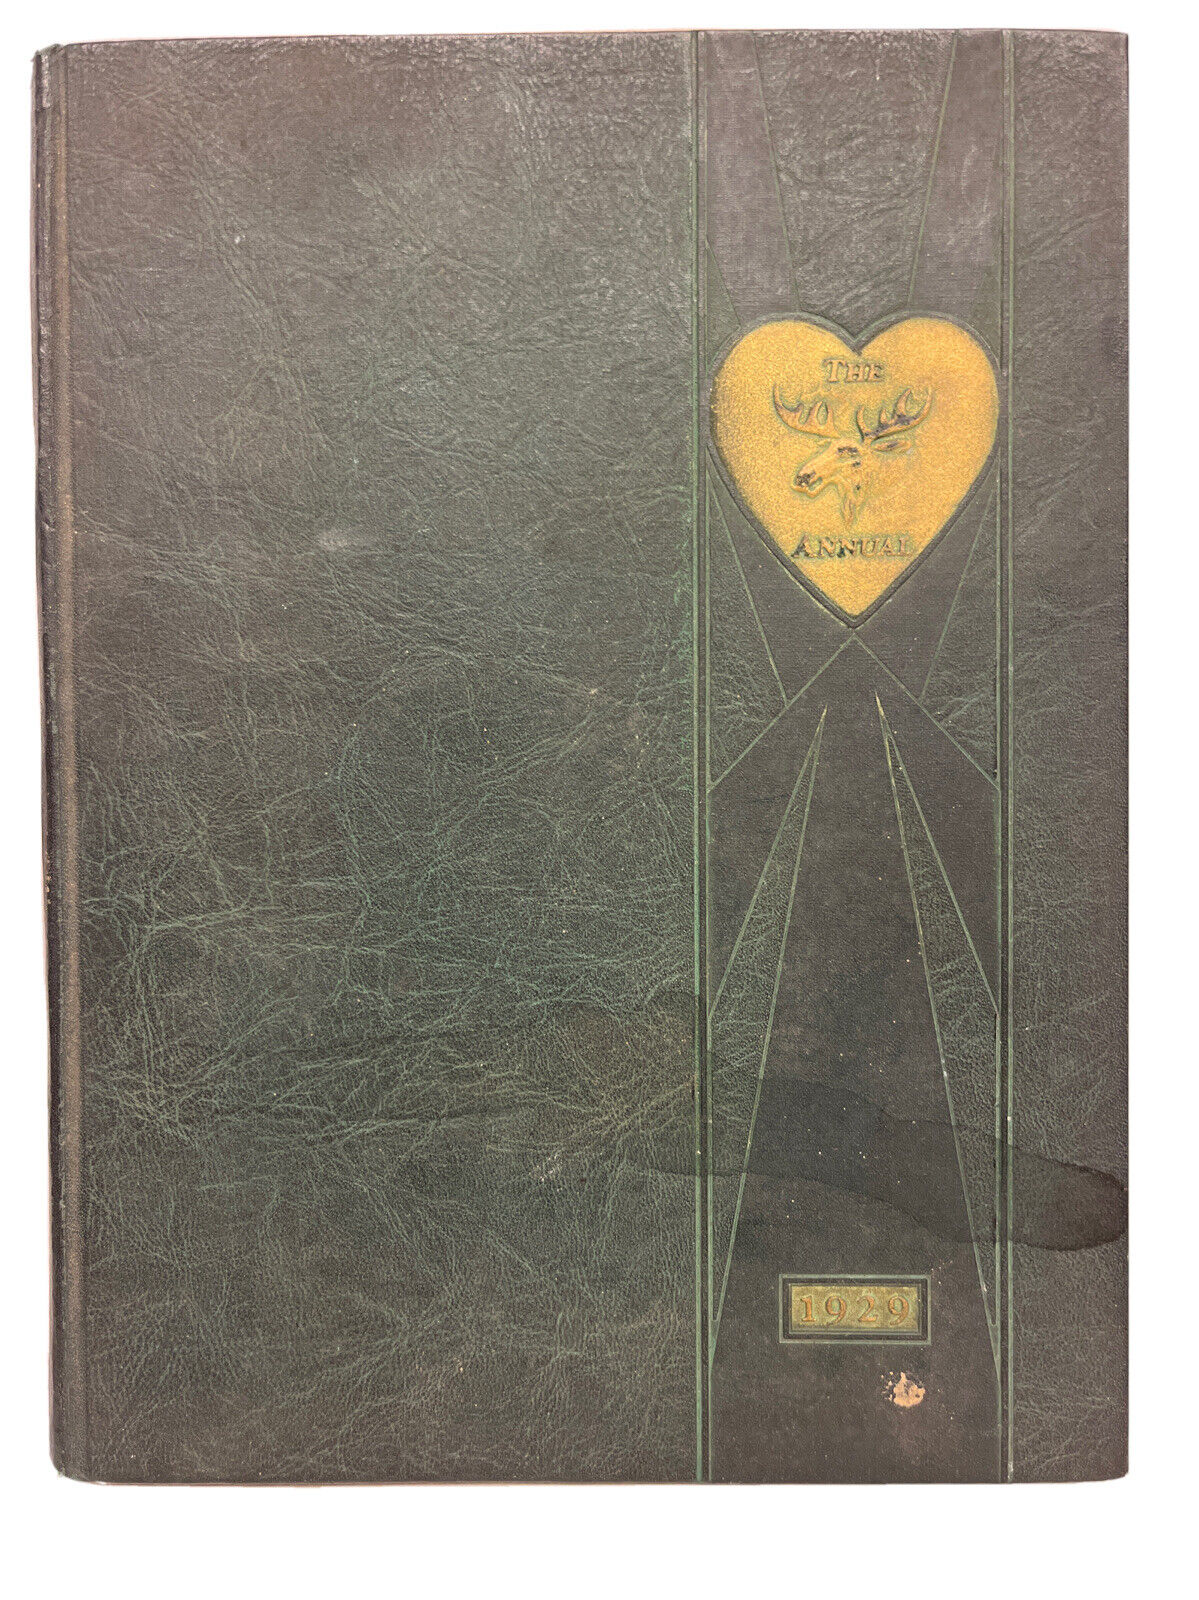 1929 Mooseheart IL High School Yearbook